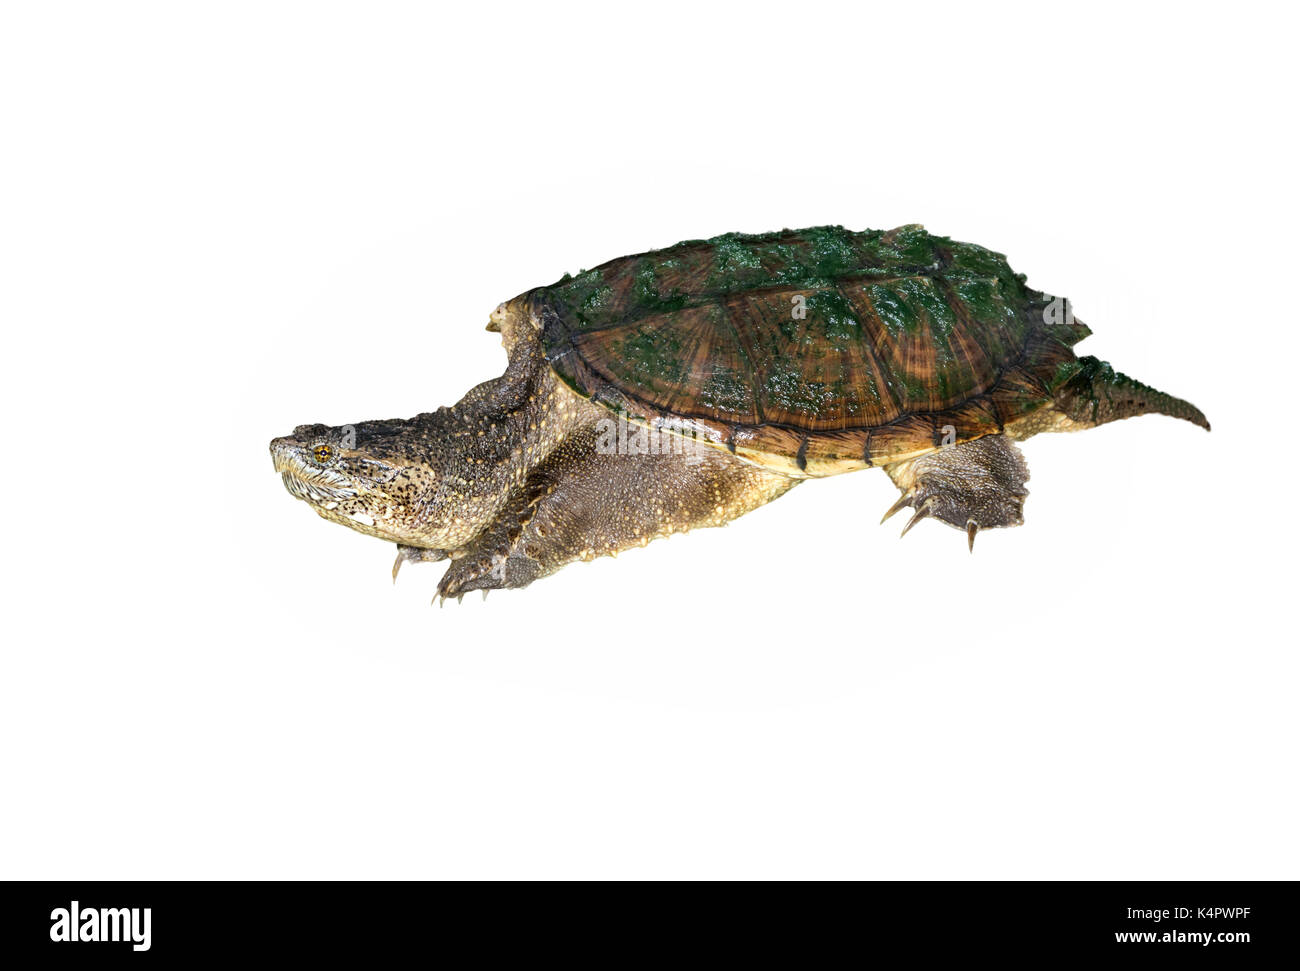 Common snapping turtle (Chelydra serpentina), isolated on white background. Stock Photo